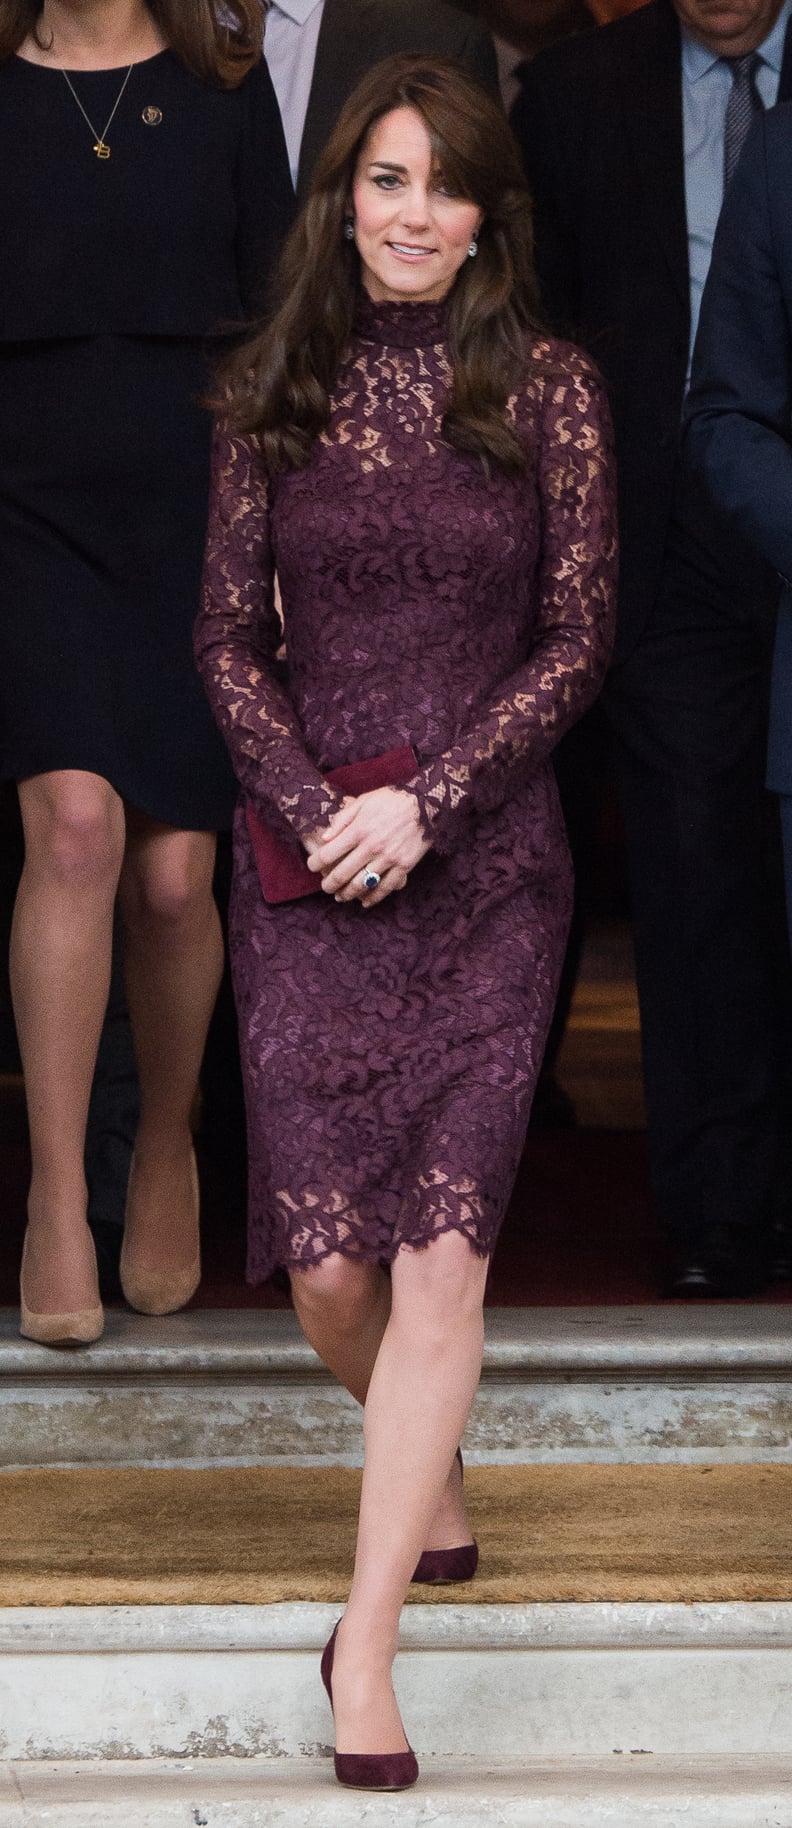 Kate First Wore a Dolce & Gabbana Dress in October 2015 During China's State Visit